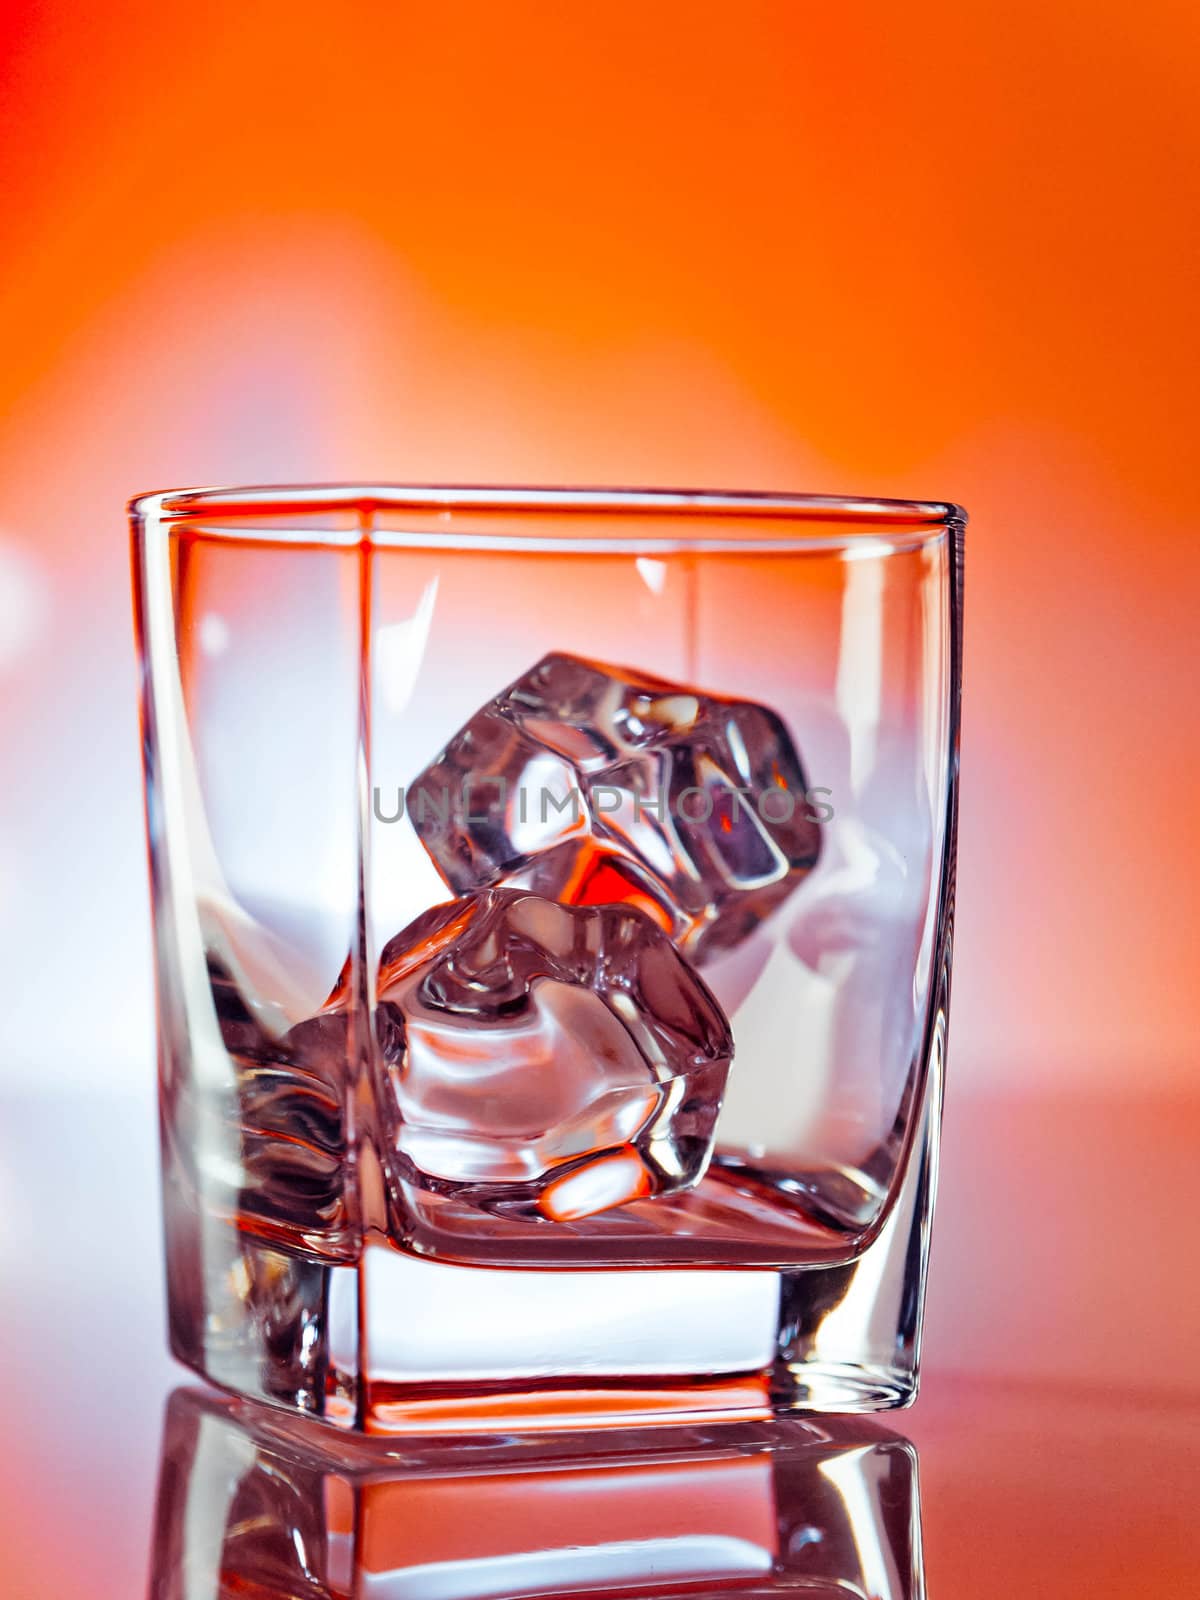 Empty tumbler with two ice cubes over vibrant orange background